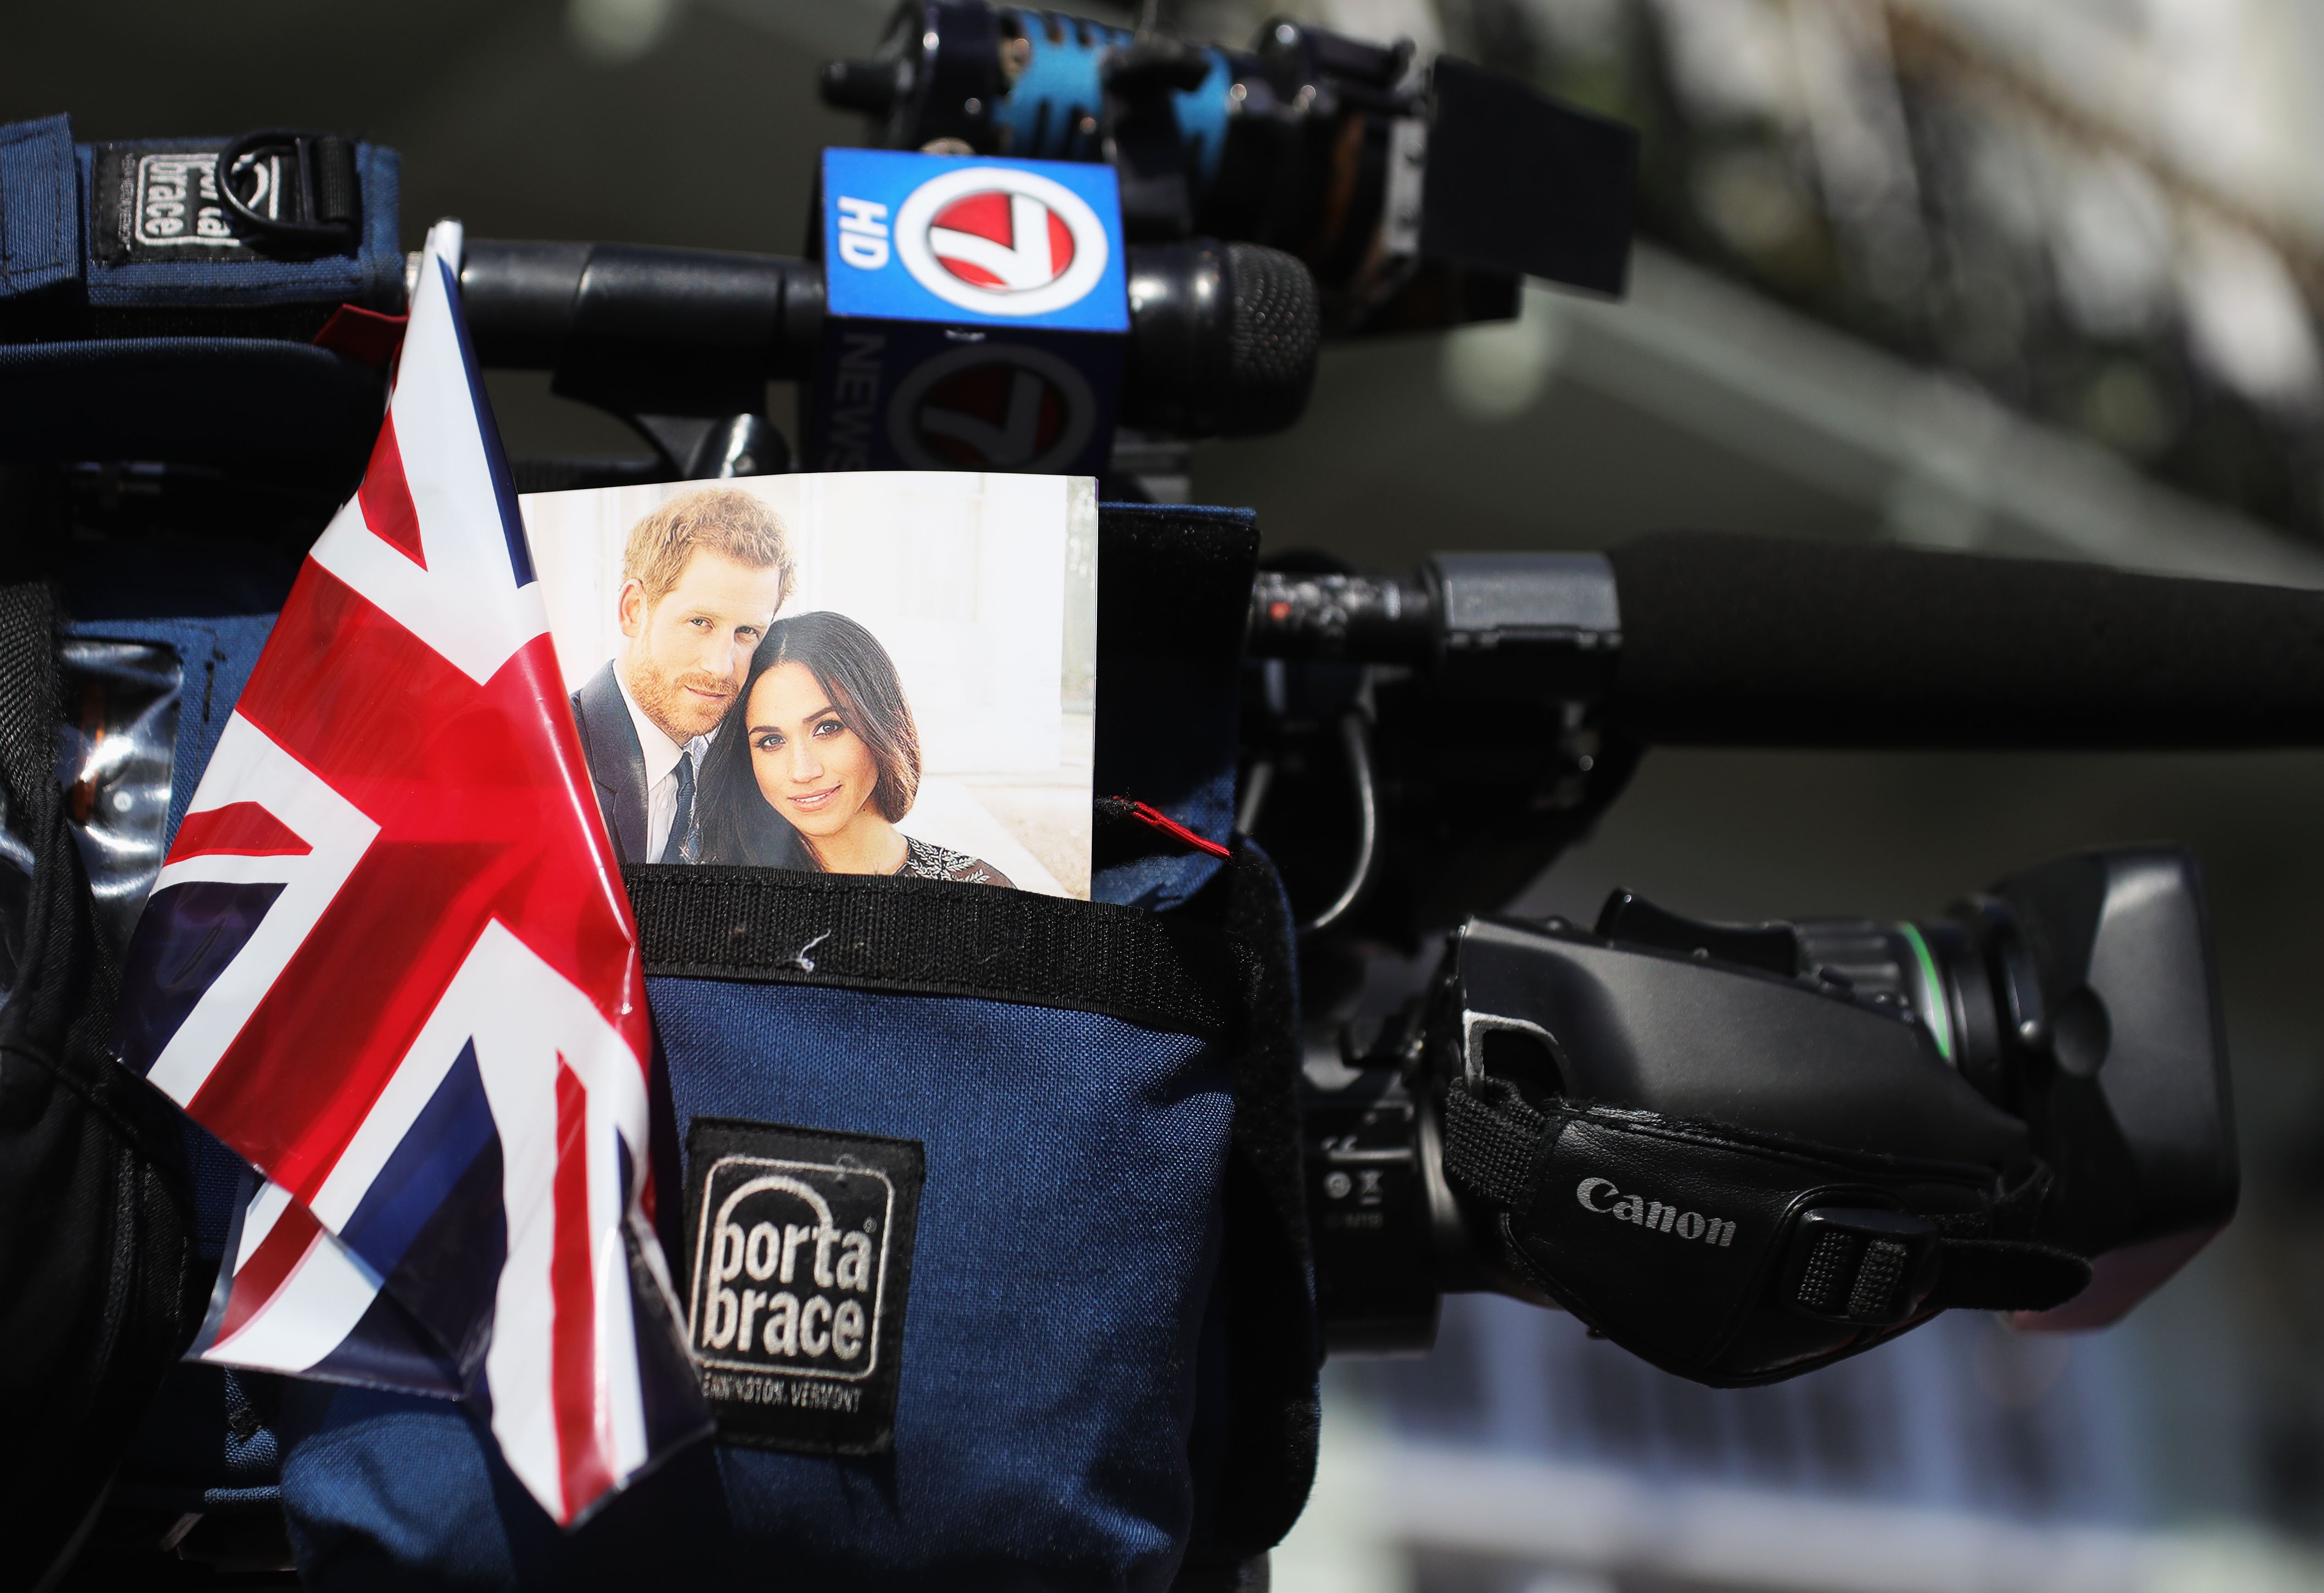  A Union Jack flag and a photo of Harry and Meghan sits on TV camera during the wedding of Prince Harry Harry to Ms. Meghan Markle St George's Chapel, Windsor Castle on May 19, 2018 in Windsor, England. | Source: Getty Images